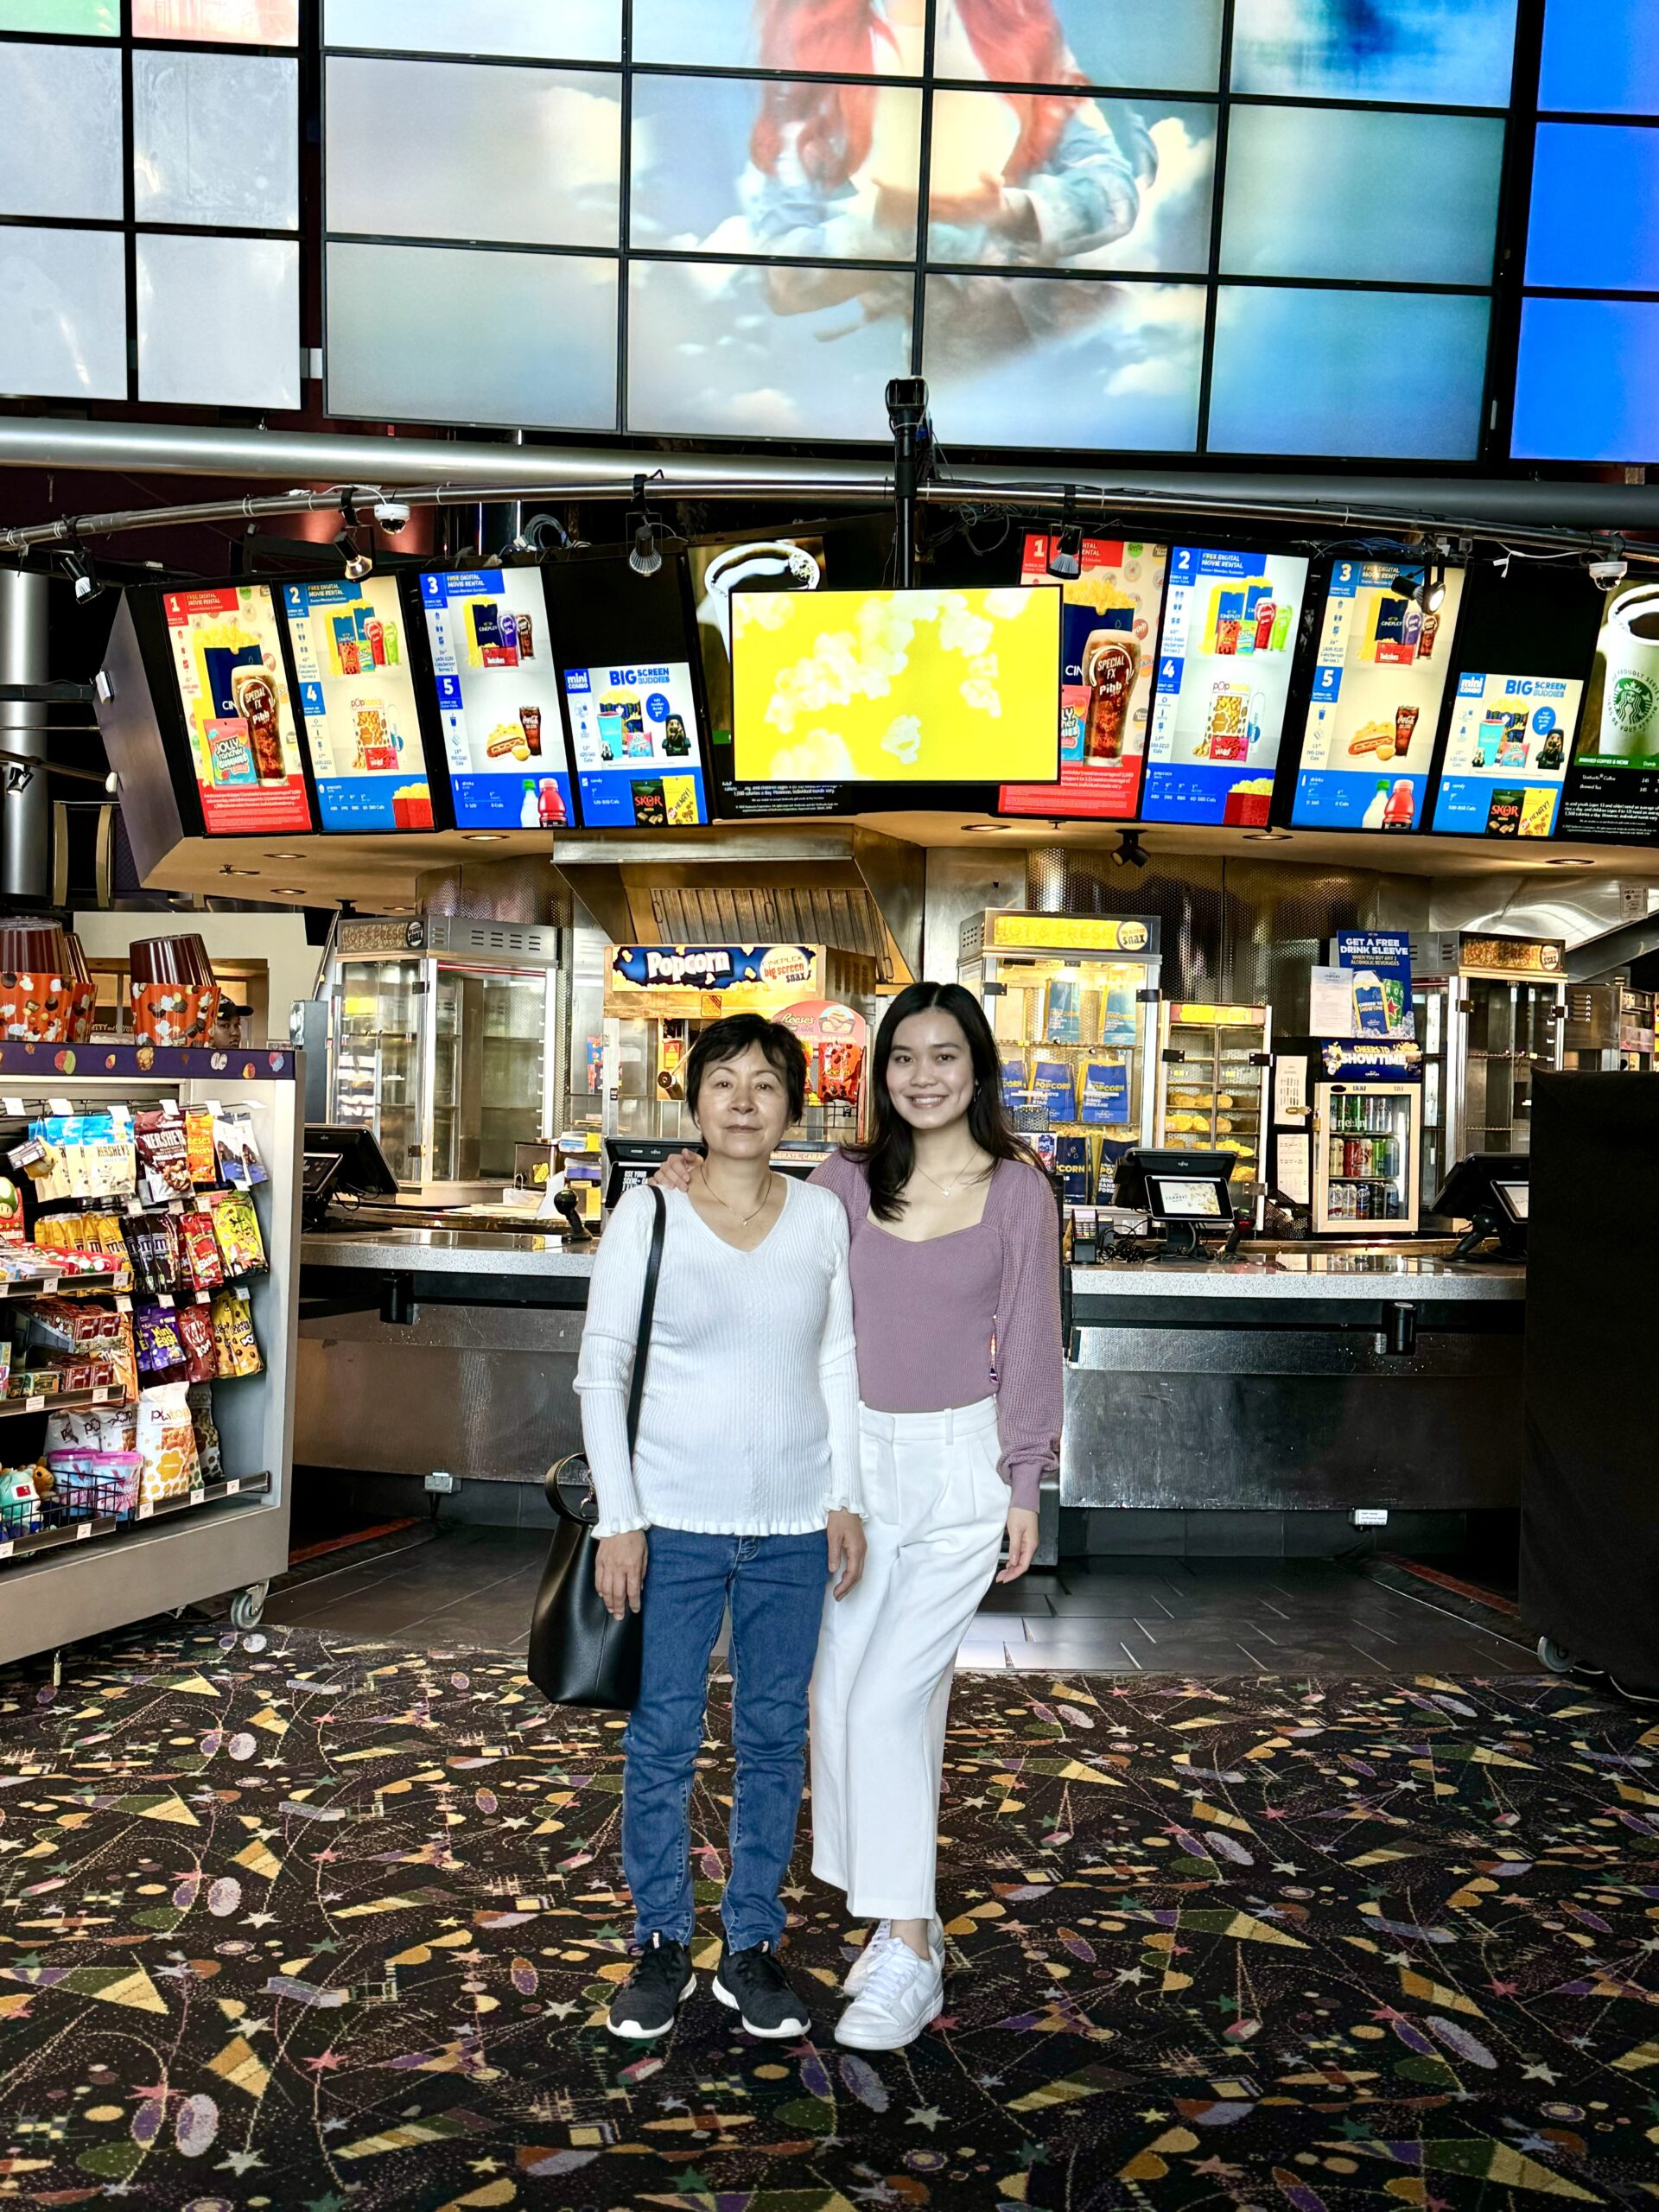 mother and daughter posing in front of movie theater concession stand